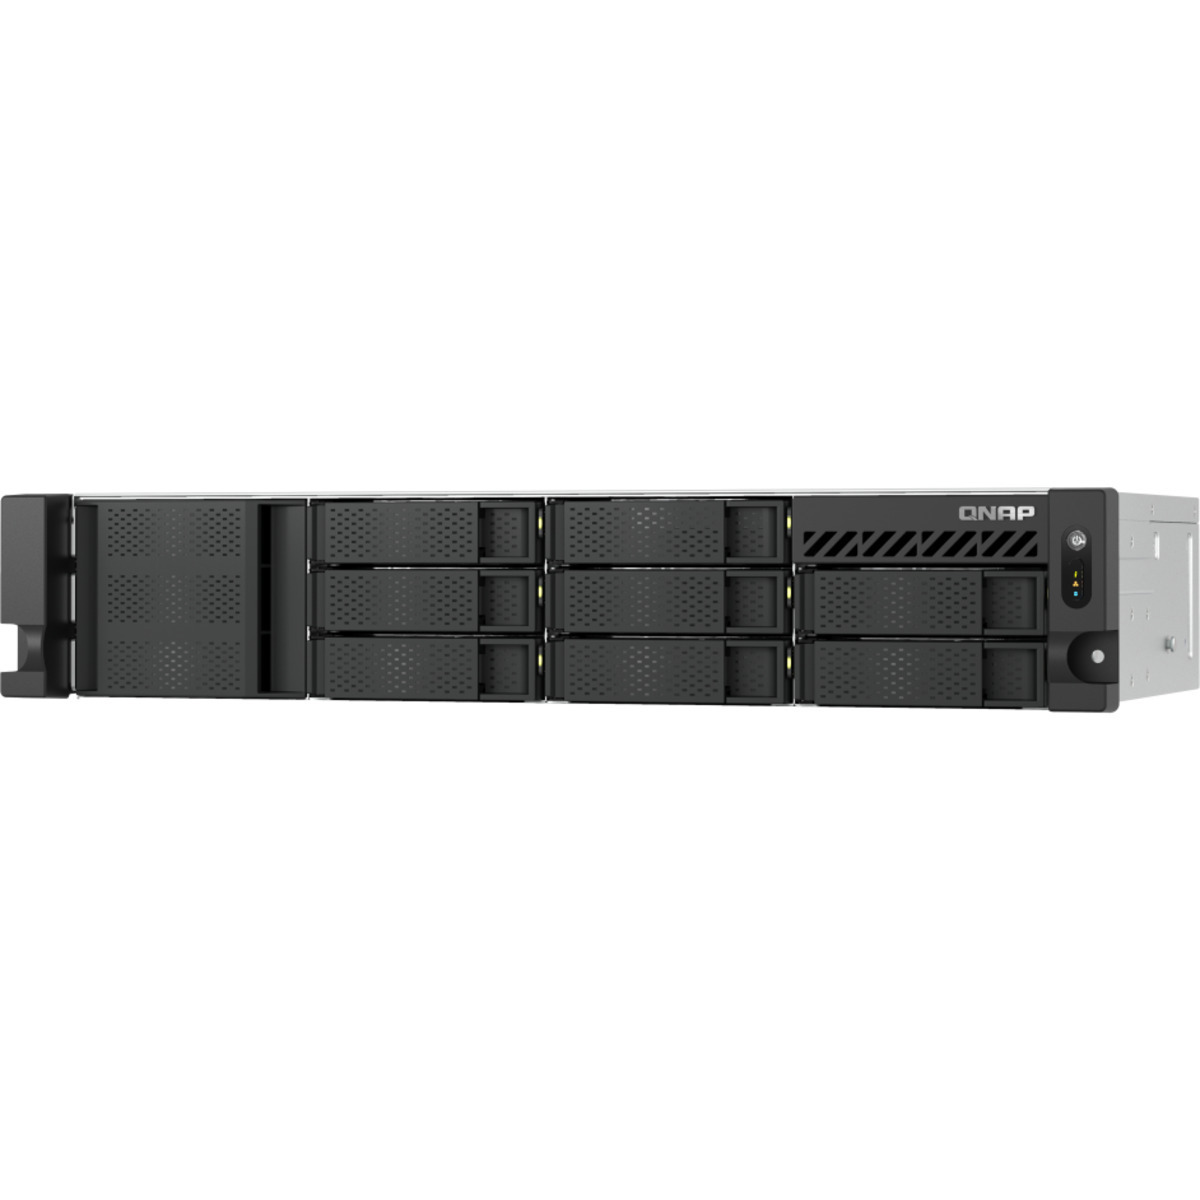 QNAP TS-855eU 12tb 8-Bay RackMount Multimedia / Power User / Business NAS - Network Attached Storage Device 6x2tb Western Digital Red Plus WD20EFZX 3.5 5400rpm SATA 6Gb/s HDD NAS Class Drives Installed - Burn-In Tested - FREE RAM UPGRADE TS-855eU